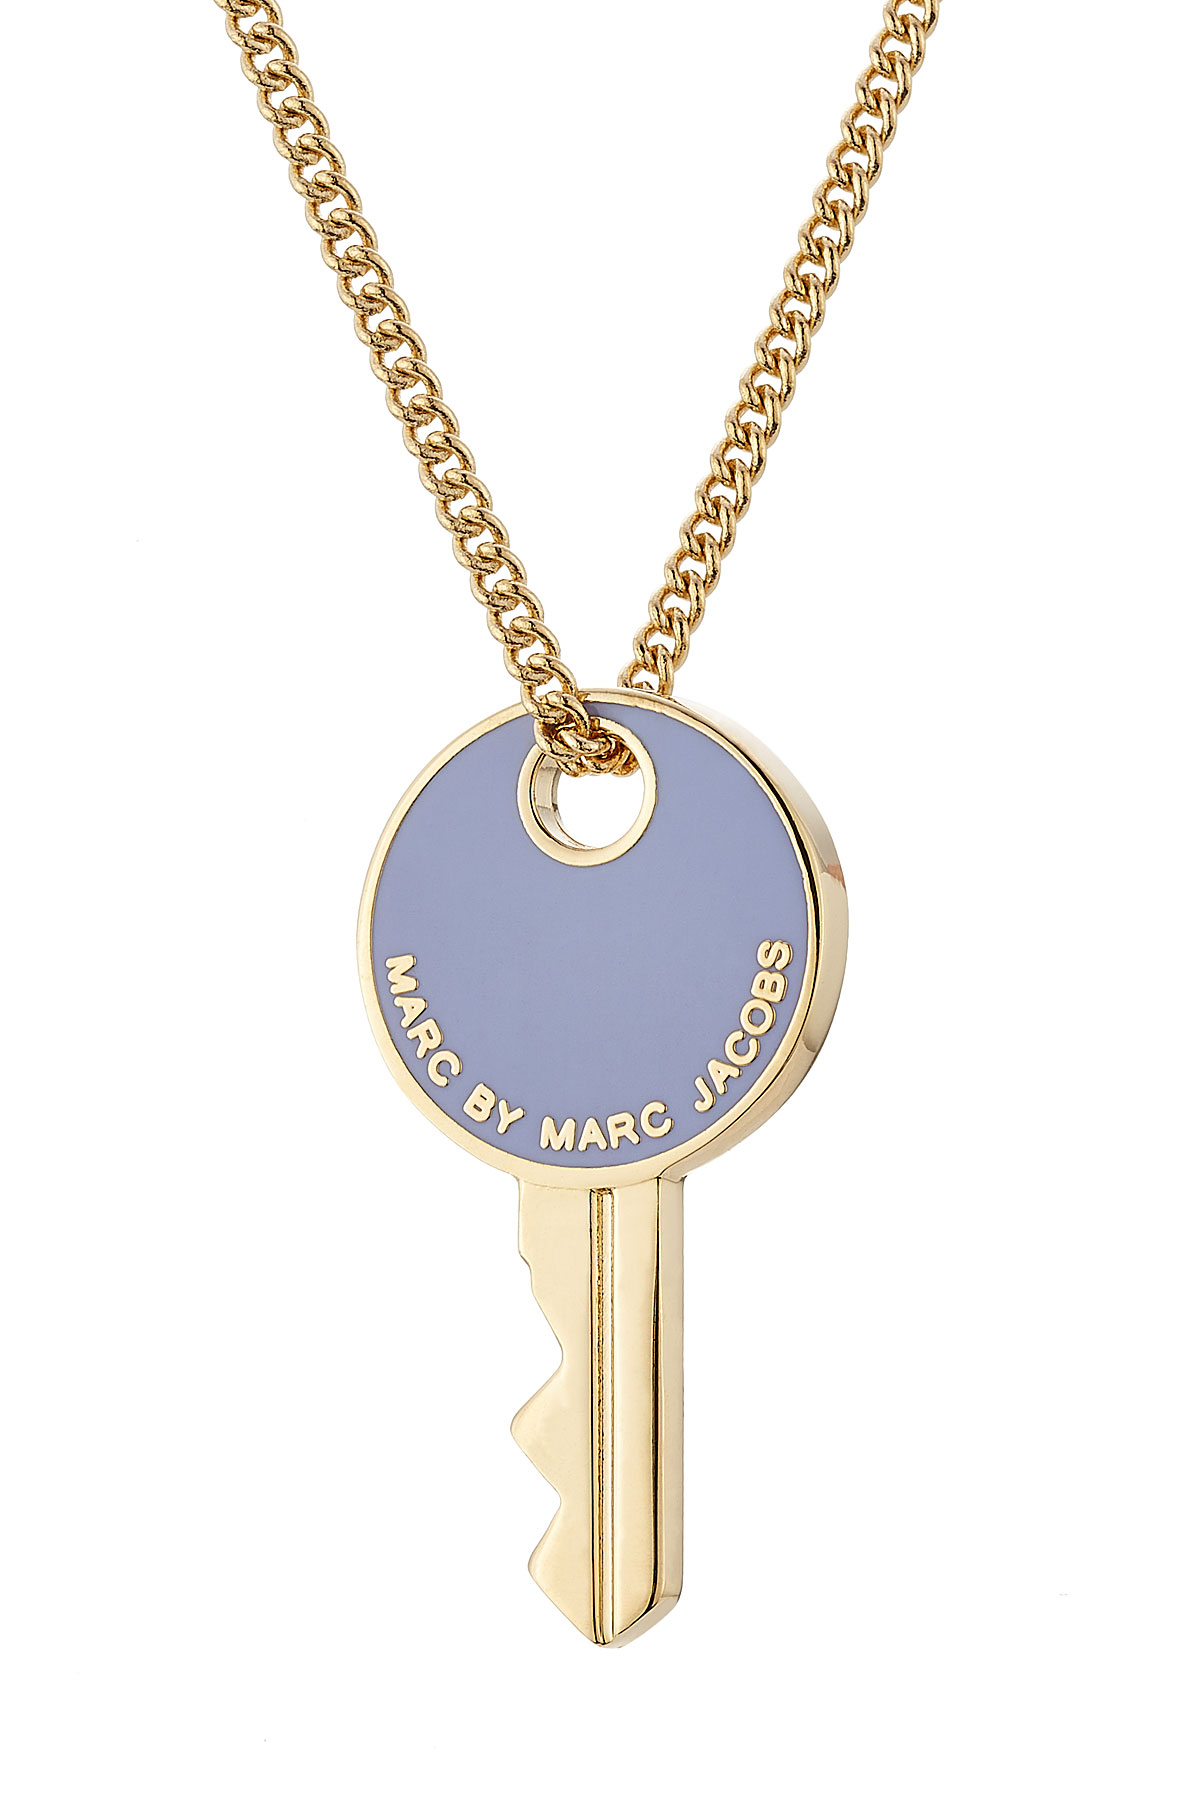 Lyst - Marc By Marc Jacobs Lock-in Key Necklace - Gold in Metallic